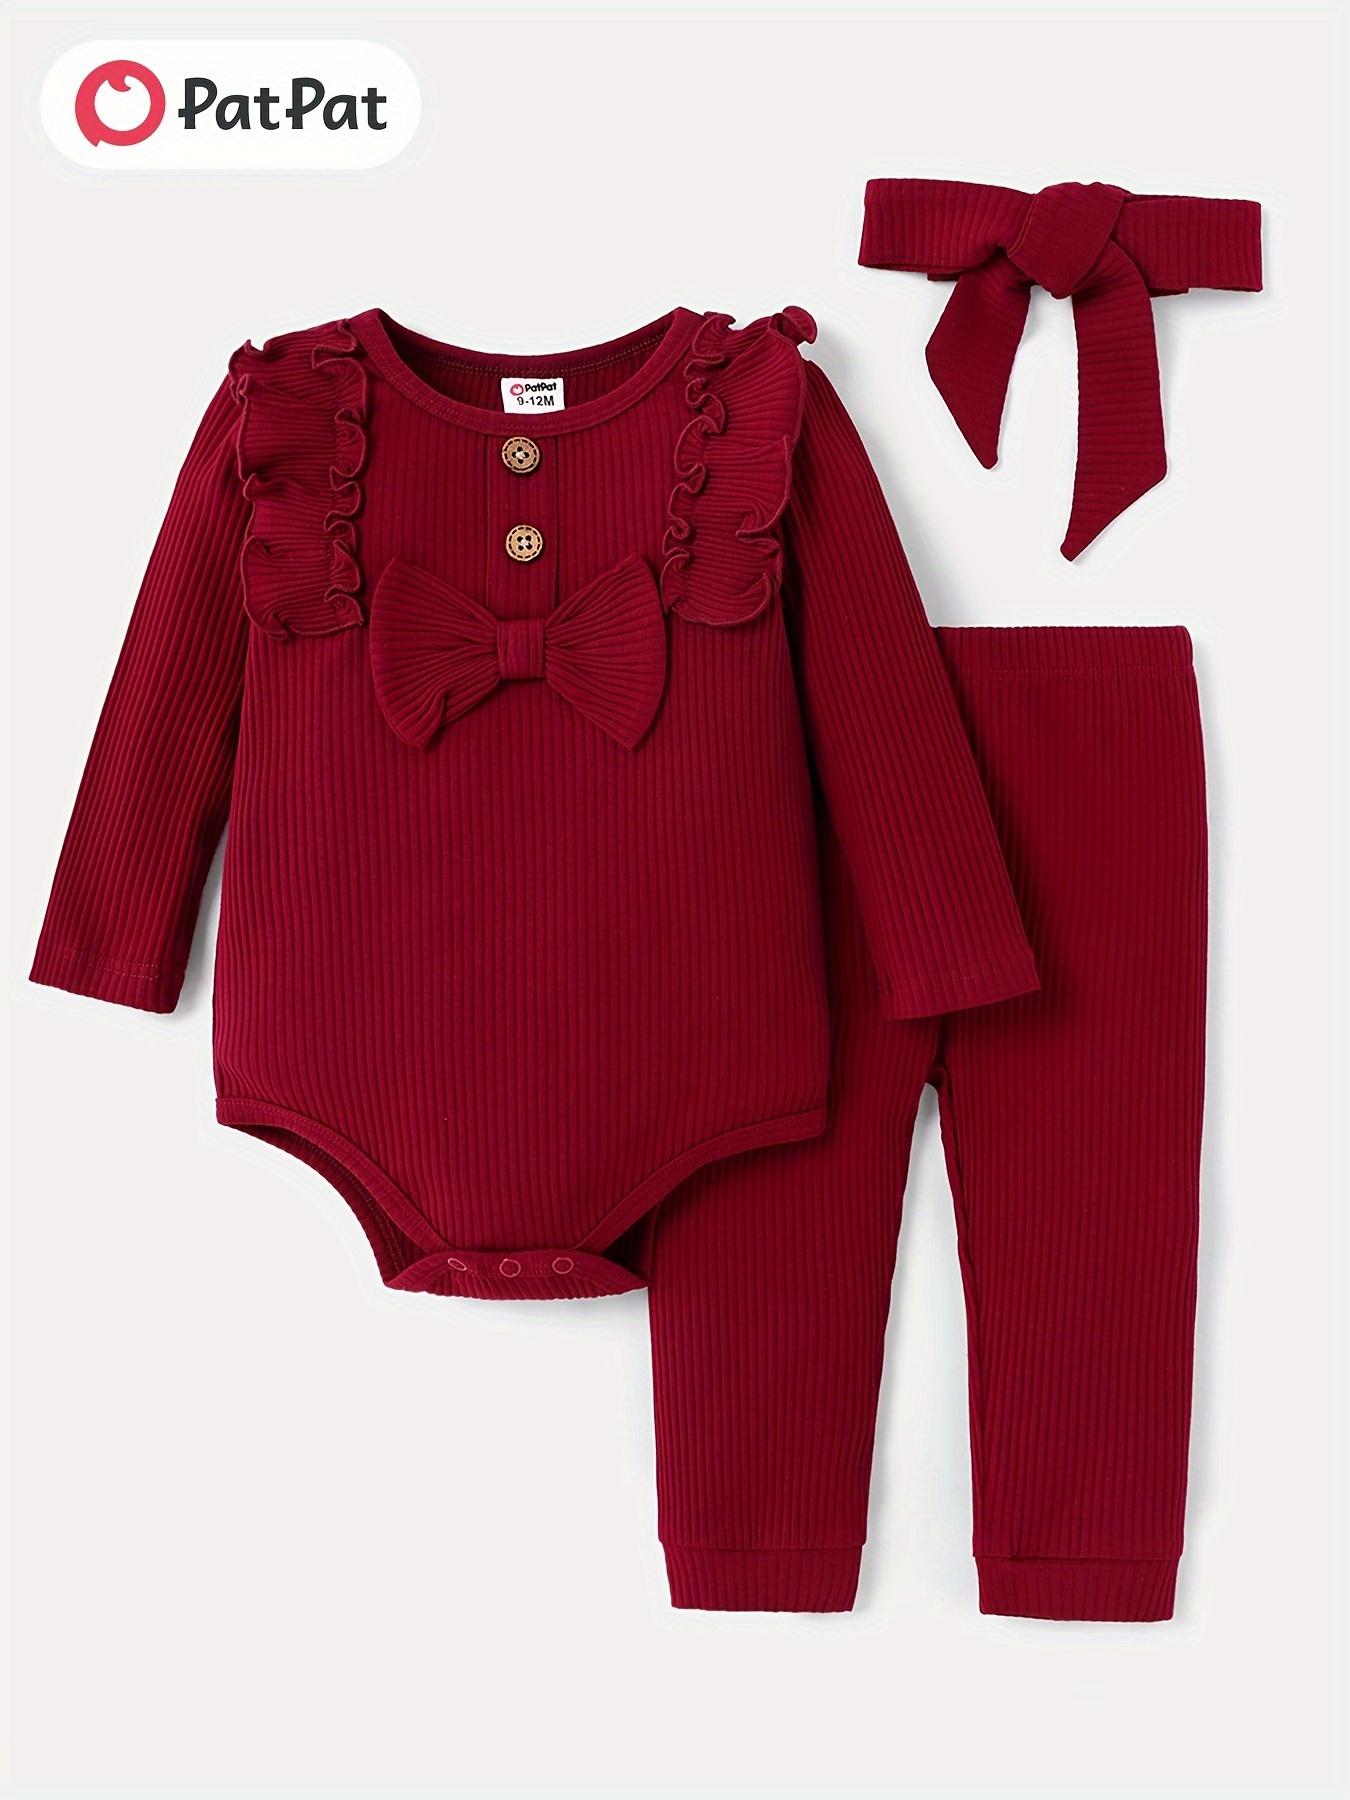 2pcs Baby Girl Solid Rib Knit Long-sleeve Top and Floral Print Ruffle Trim Suspender Pants Set